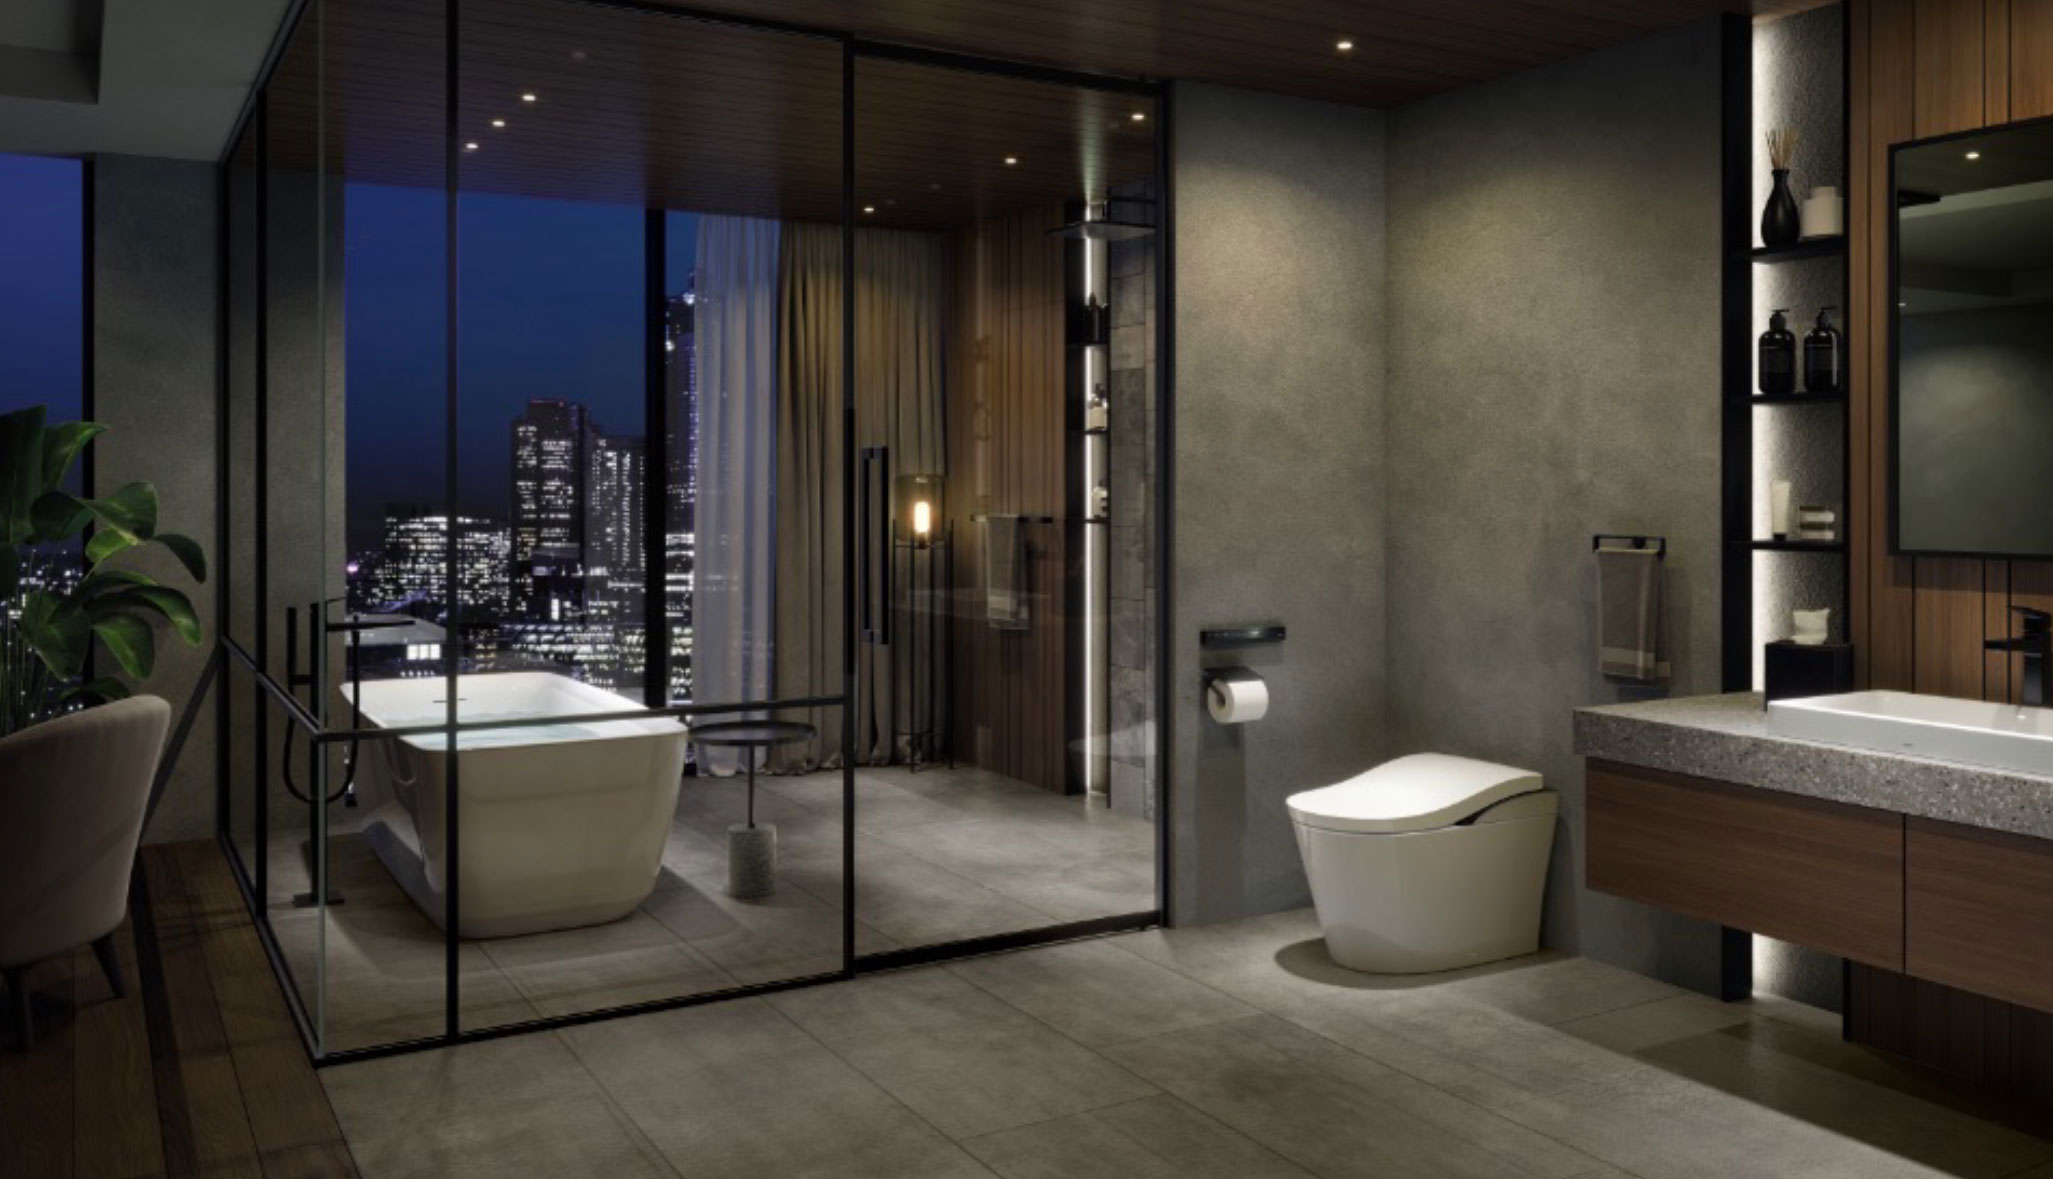 TOTO bathroom renovations optimize property value, boost ROI, and delight homeowners.